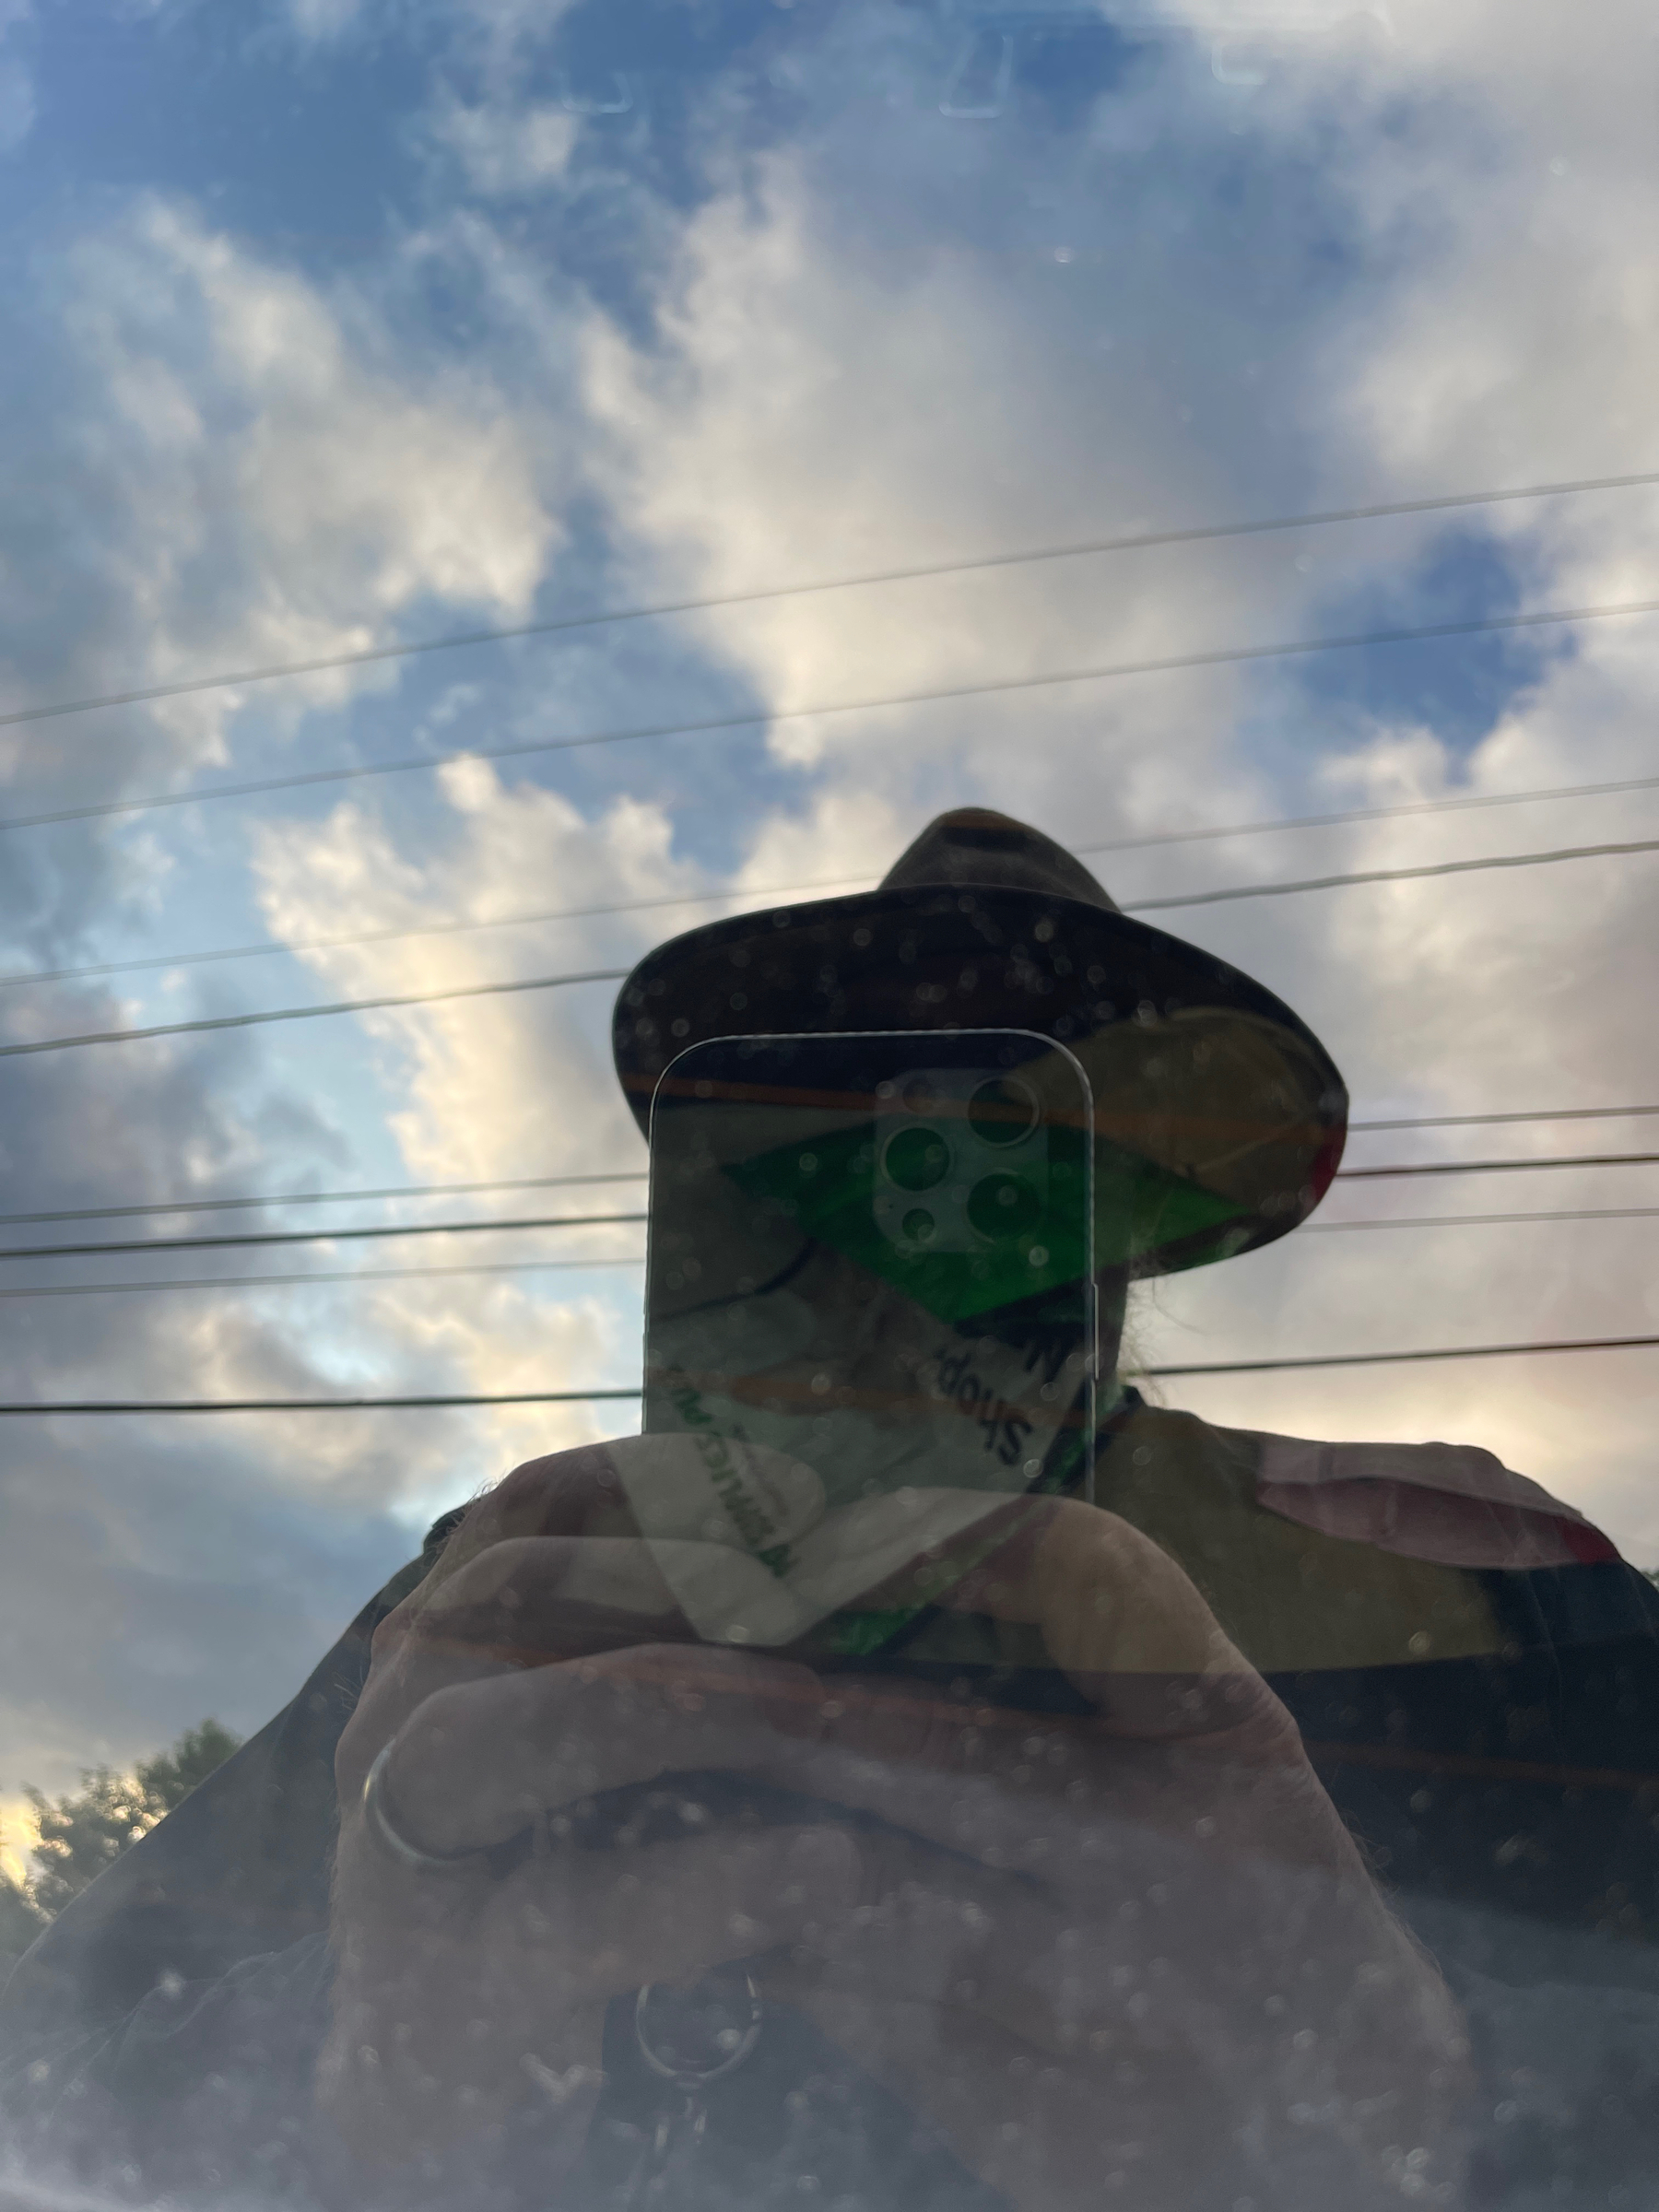 Self and clouds reflected in a car window.